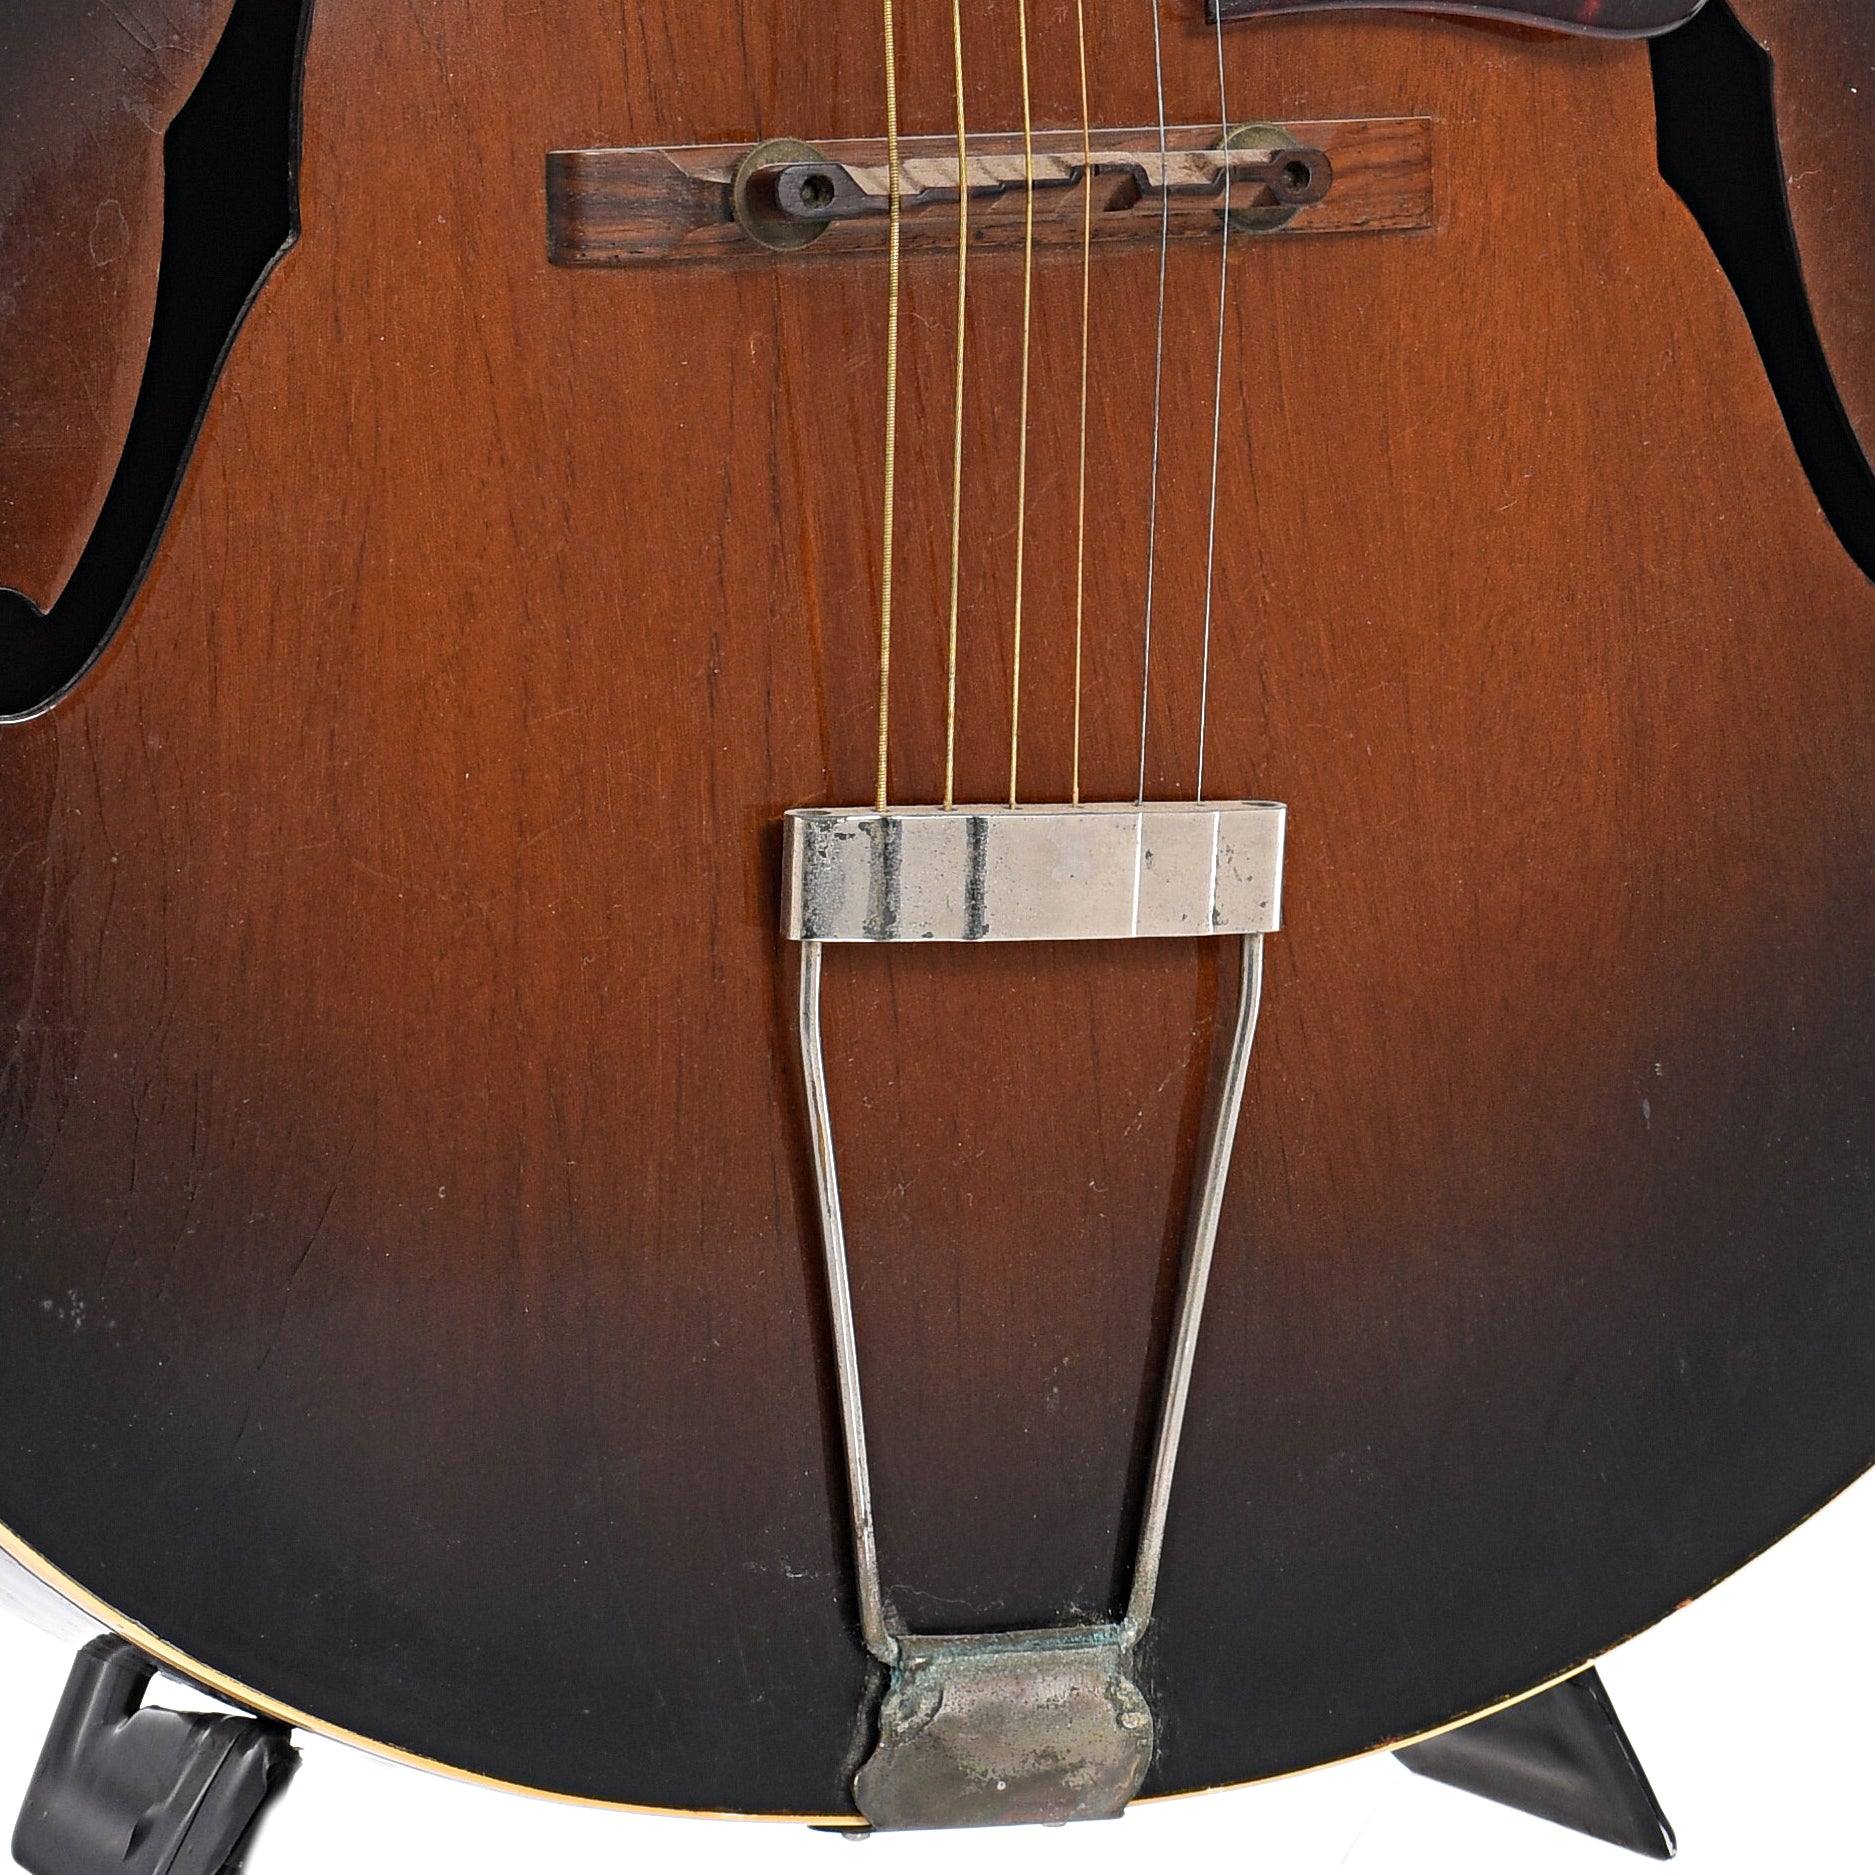 Tailpiece and bridge of Gibson L-48 Archtop Guitar (c.1948)